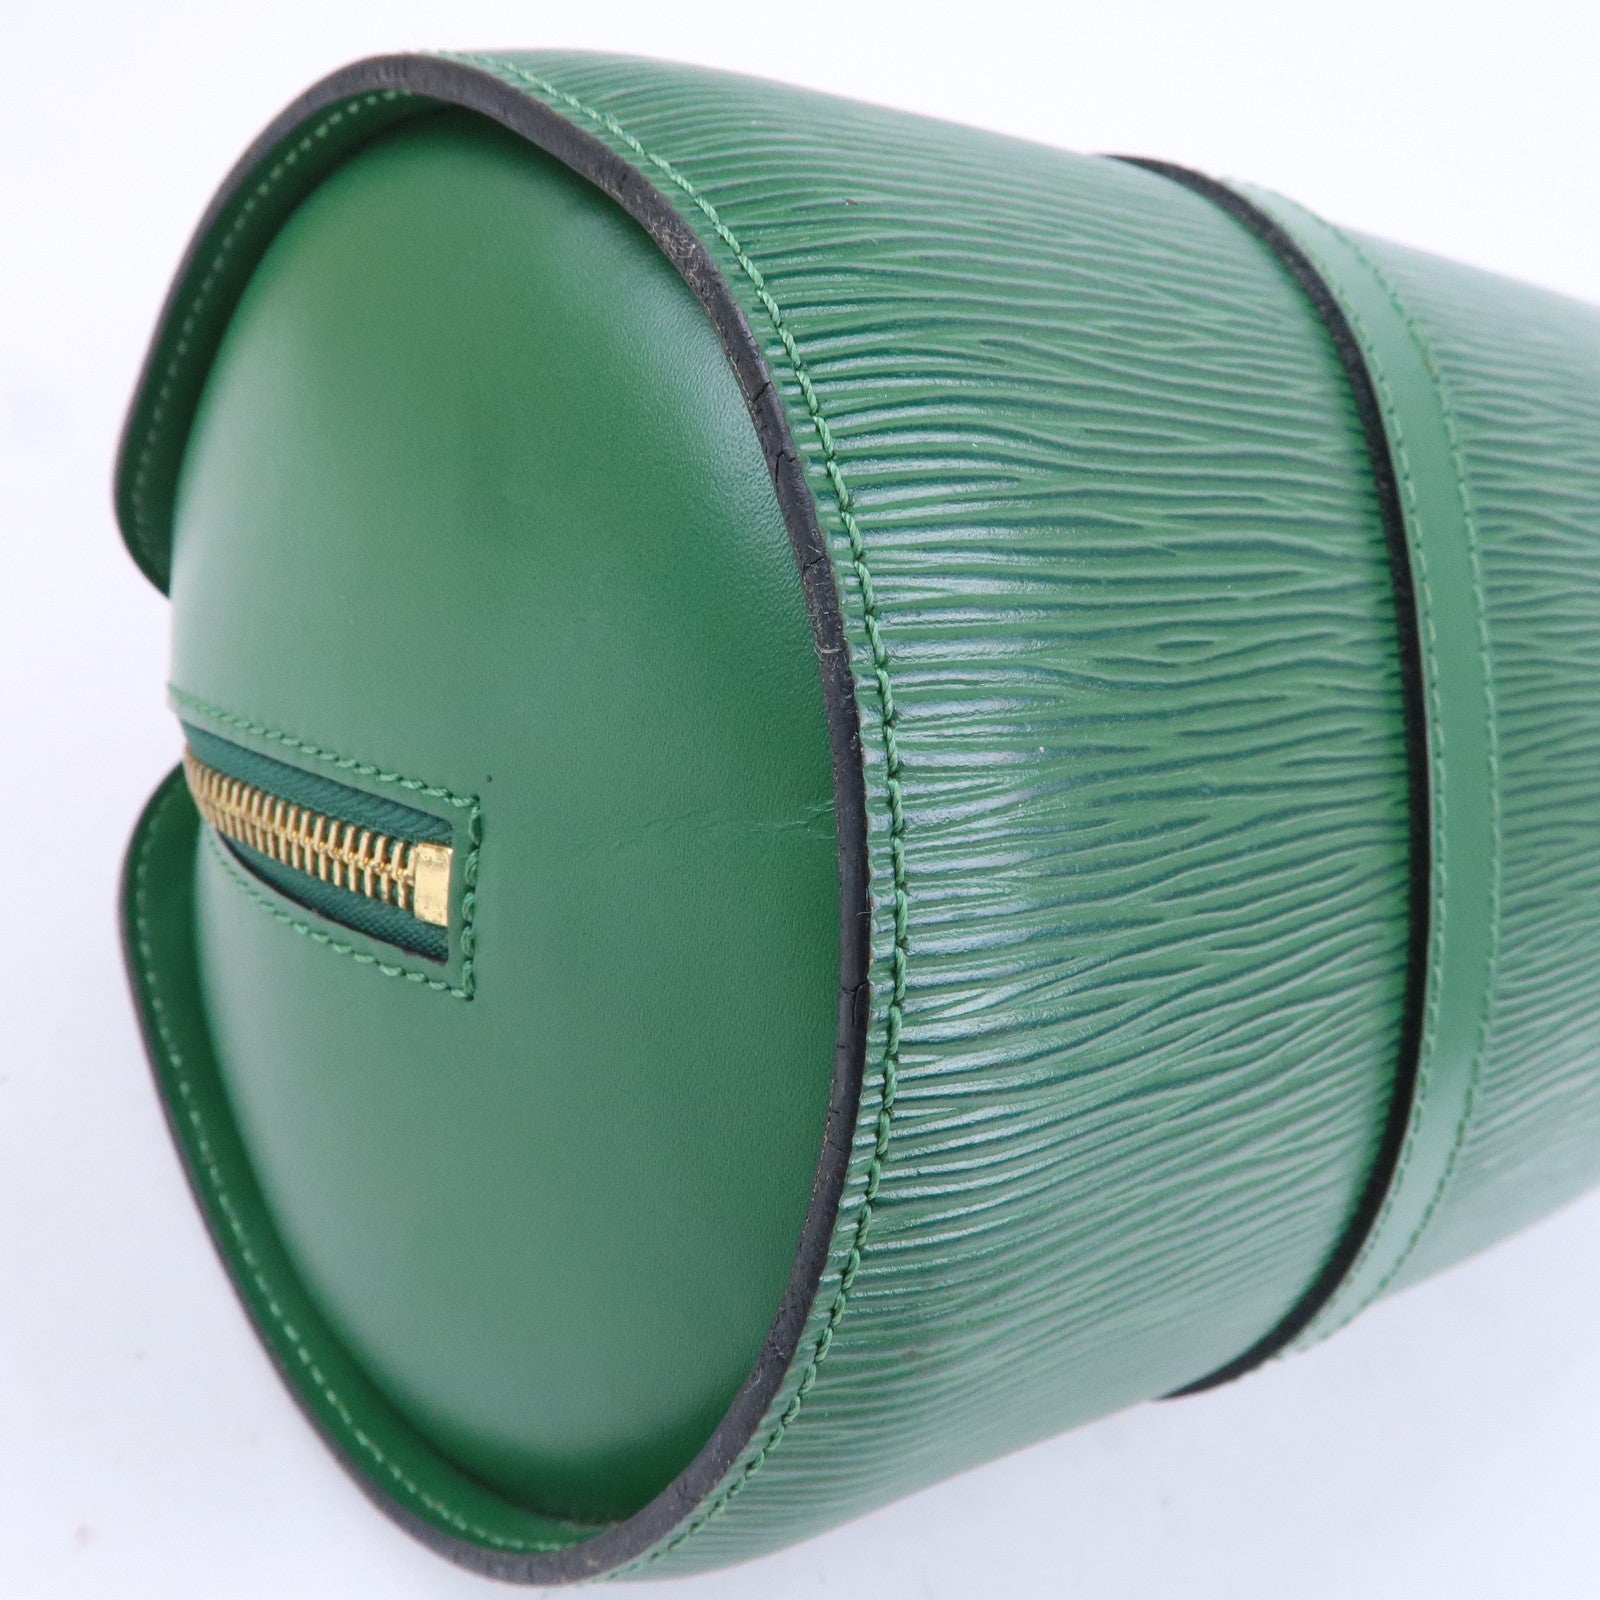 Shop for Louis Vuitton Green Epi Leather Soufflot Shoulder Bag - Shipped  from USA